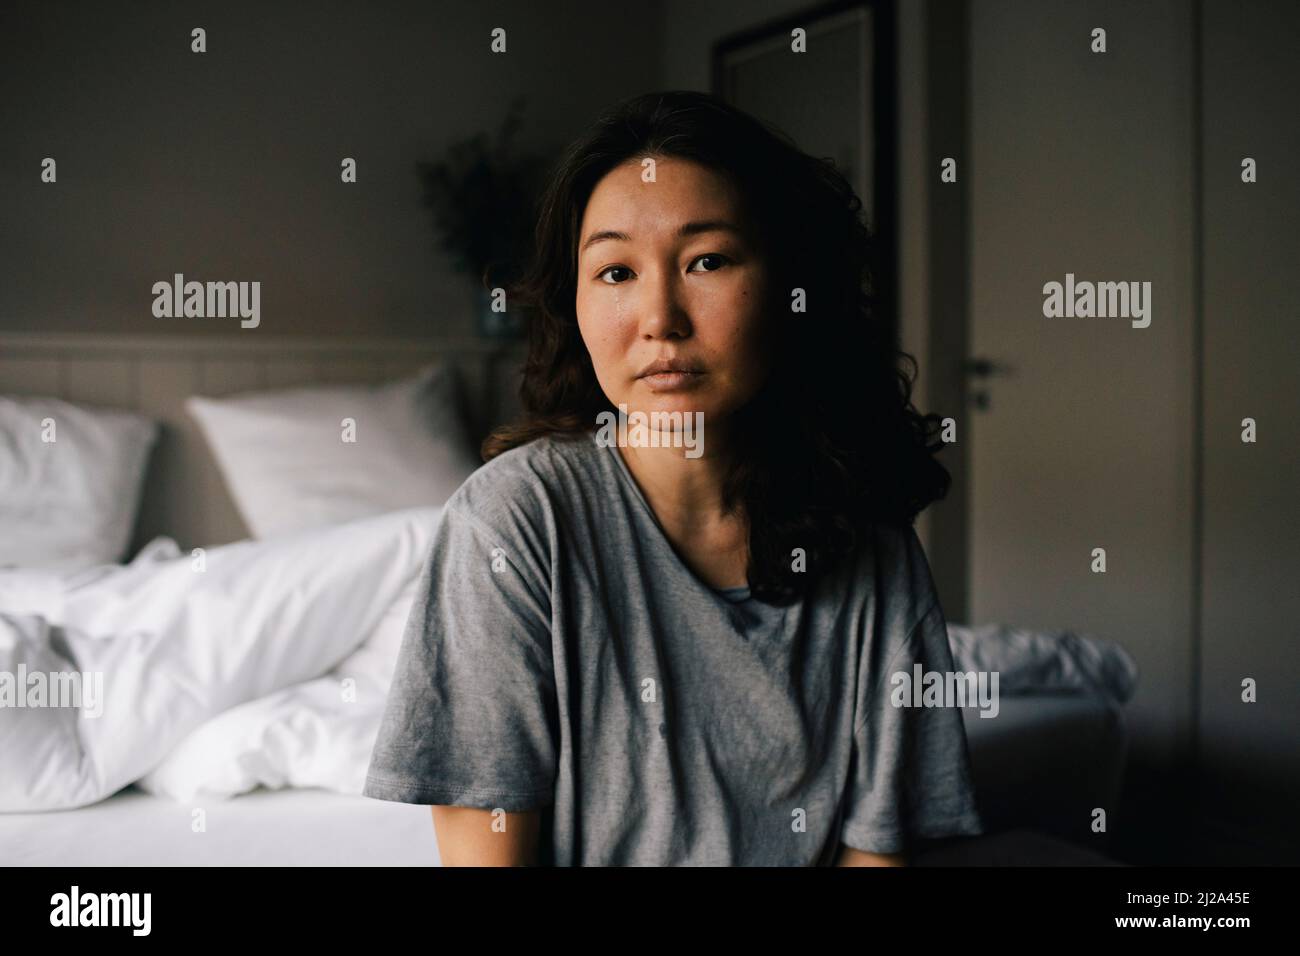 Portrait of sad woman with mental health illness sitting in bedroom at home Stock Photo